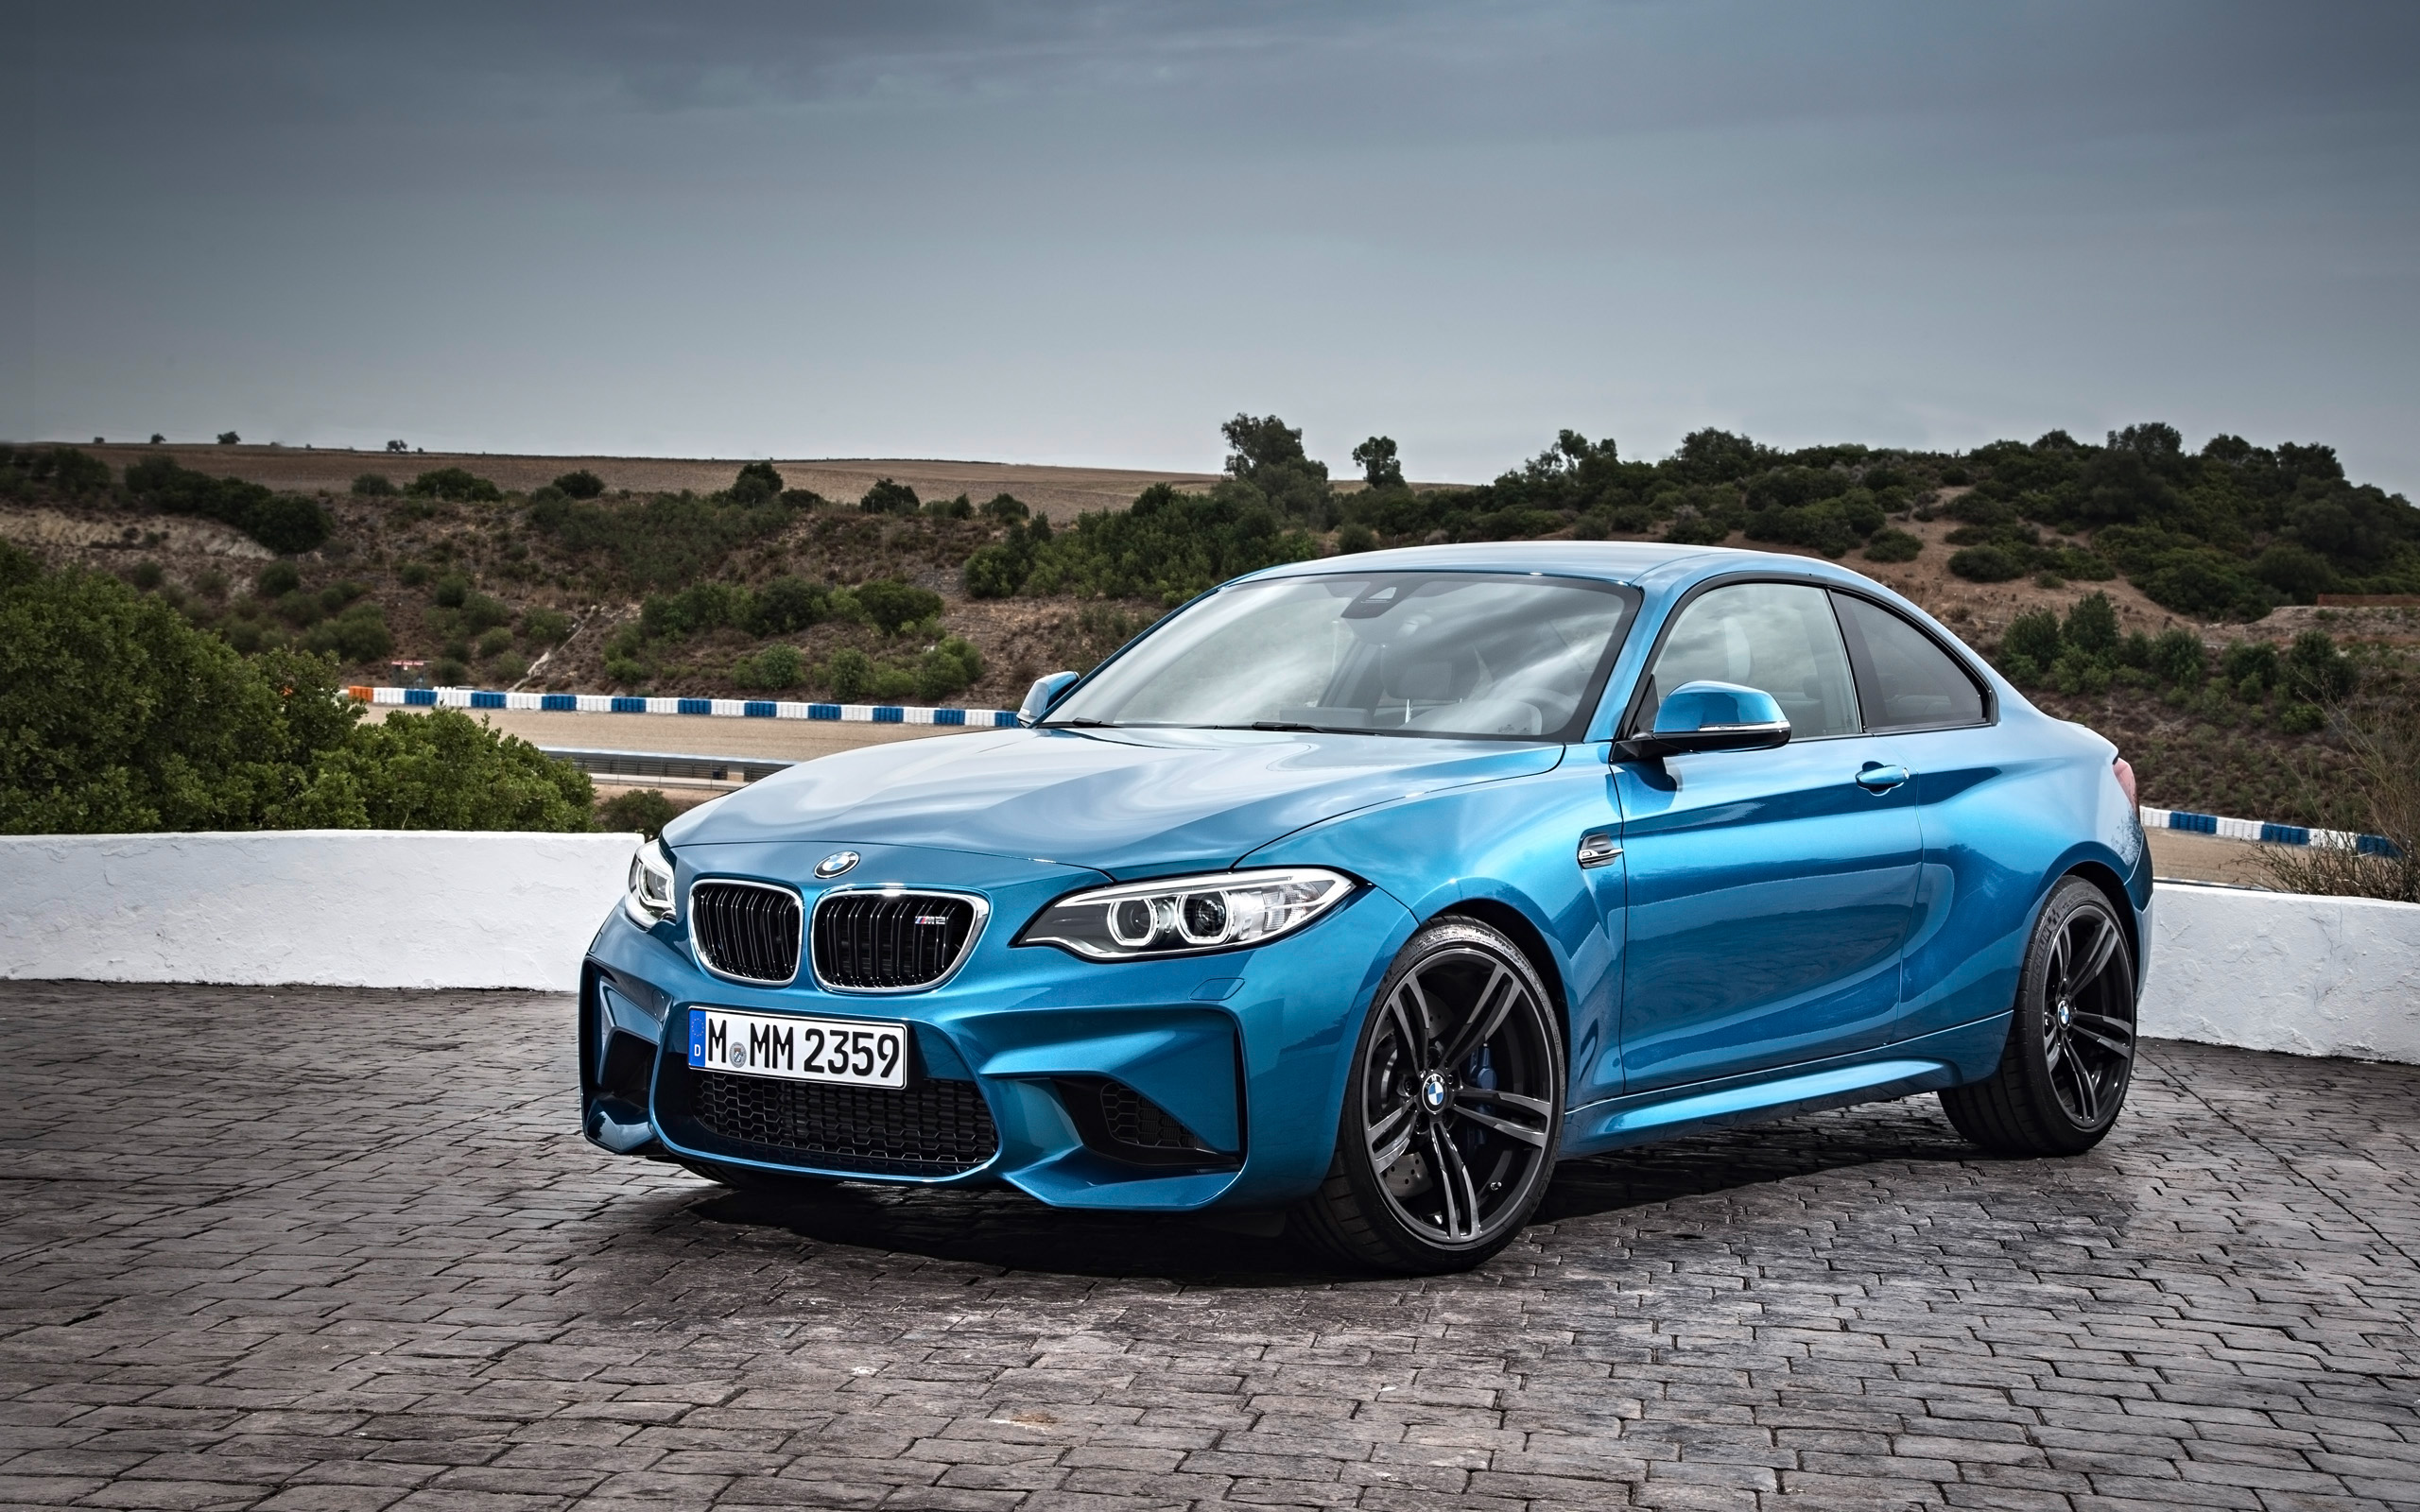 2016 BMW M2 Coupe Wallpaper | HD Car Wallpapers